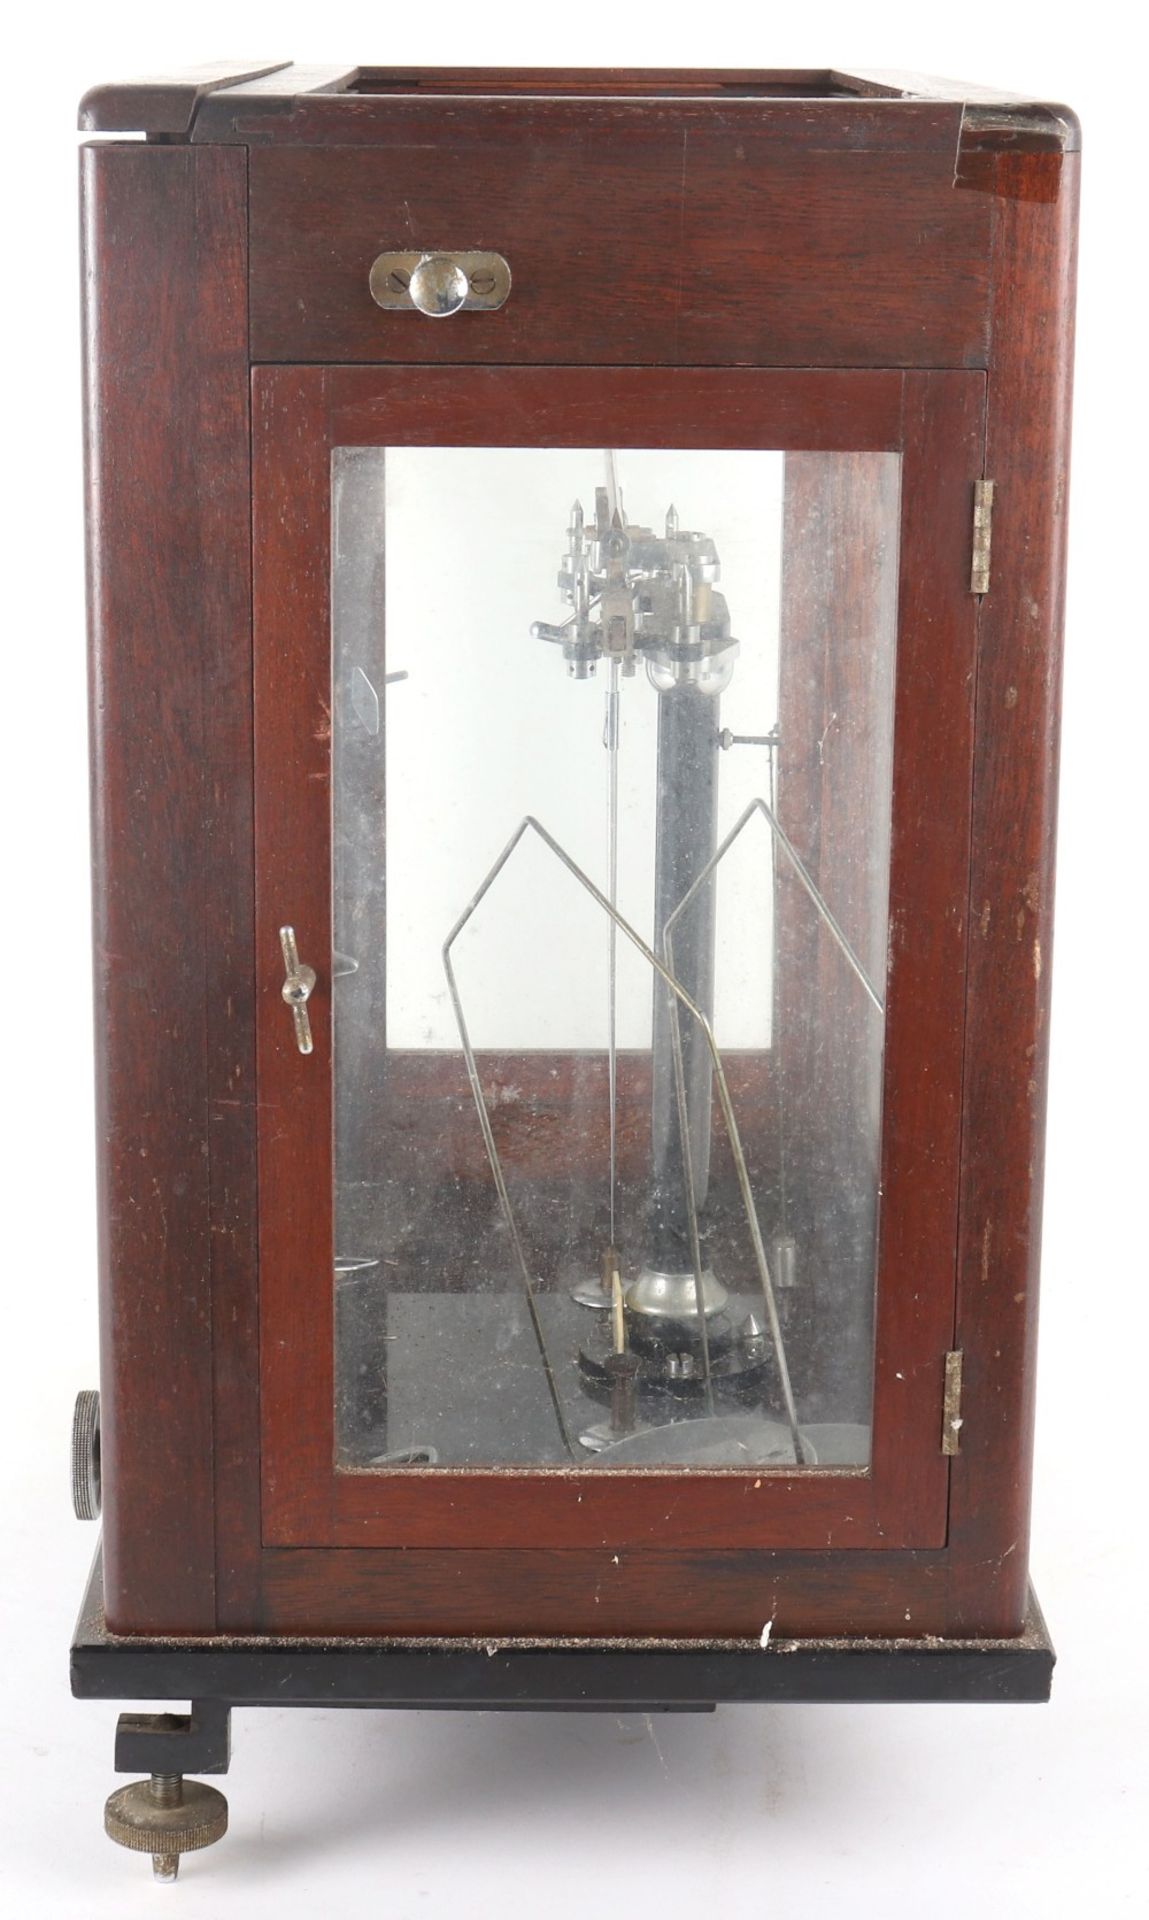 A Townson & Mercer set of scales, in glass, oak and mahogany case - Image 5 of 10